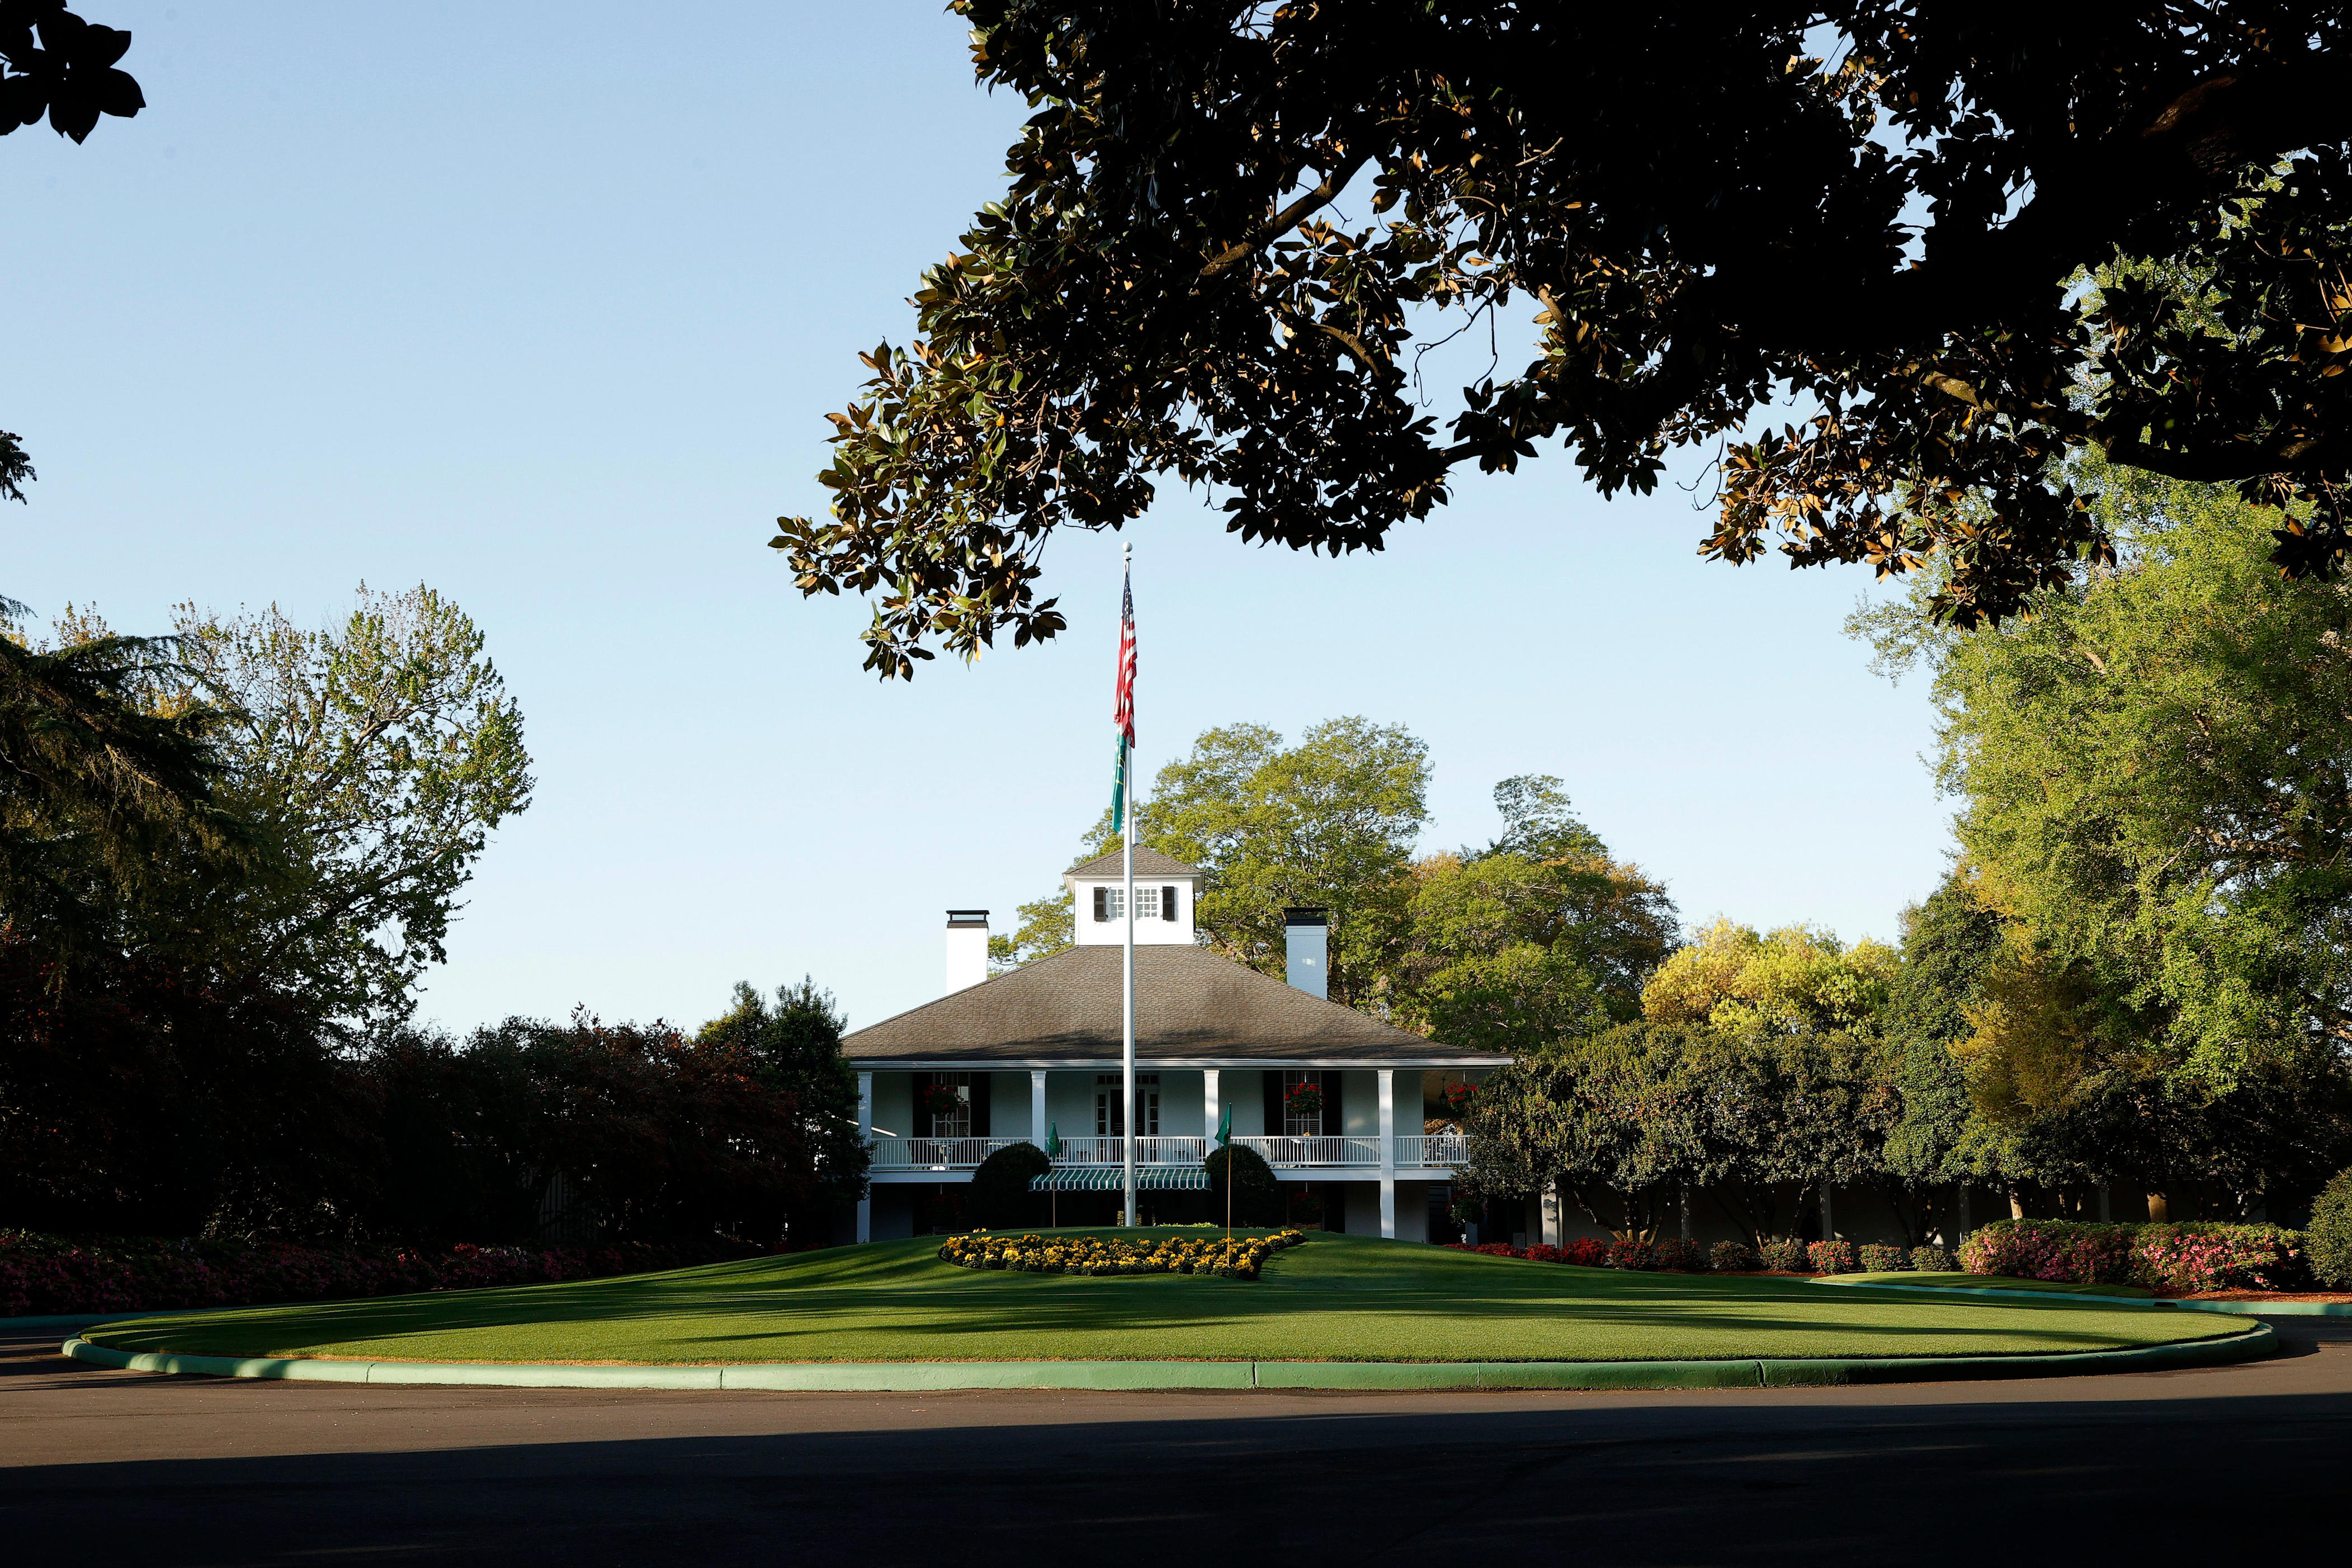 <p>The esteemed club, founded and co-designed by legendary golfer and Grand Slam winner Bobby Jones, opened for play in 1932, though <a href="https://www.businessinsider.com/masters-billionaires-favorite-golf-tournament-kicks-off-augusta-national-2024-4">women were not allowed</a> to join until August 2012.</p><p>One of the highlights of the course is its extensive flora. Per <a href="https://www.golfmonthly.com/tour/us-masters/augusta-blog/augusta-national-hole-names-88155">Golf Monthly</a>, Augusta has an estimated 80,000 plants from over 350 varieties, and each hole is named for a corresponding plant. Throughout the weekend, pros like Dustin Johnson and Rickie Fowler will test their skills on holes like Magnolia, Juniper, Azalea, and Holly in pursuit of tournament victory.</p><p>And if you're interested in playing this famed course someday, you'll have to get in line. Most memberships are inherited from one of the club's existing 300 or so members, but you could attend as one of their guests. You could also play as a guest of a Masters champion.</p><p>If these options sound a little too unrealistic, there is one other way to gain access: volunteering at the Masters. As to be expected, there's a waitlist, but if you volunteer for the full week, you'll be invited to an "Appreciation Day" in May to play a round of golf, per <a href="https://golf.com/news/augusta-national-masters-how-you-can-play/">Golf.com</a>. Keep that in mind for next year.</p>